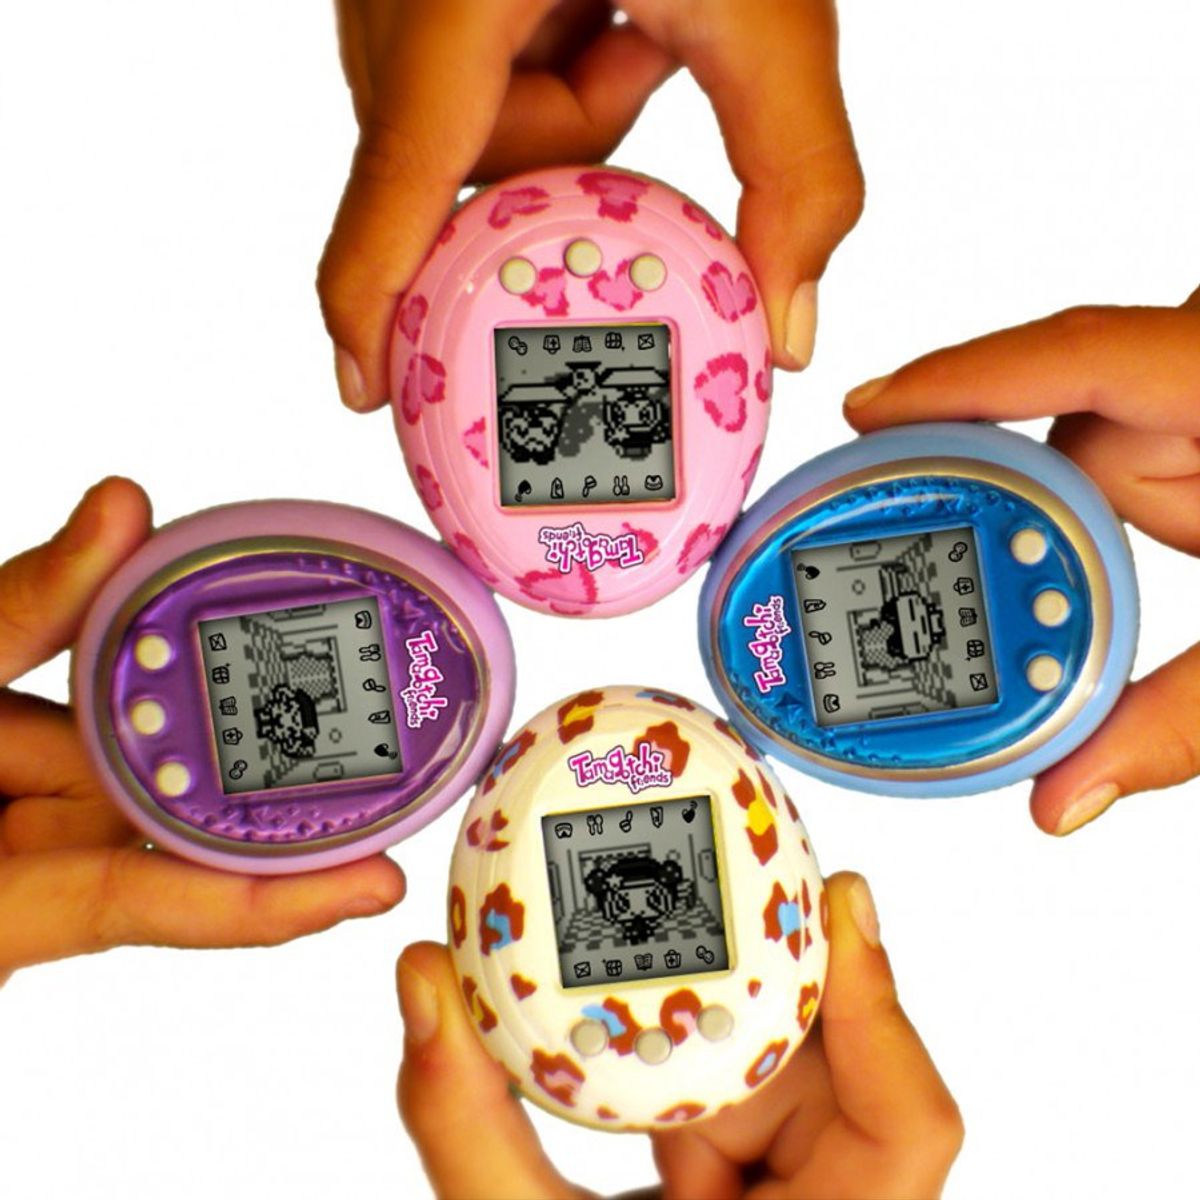 What Happened To Tamagotchis?